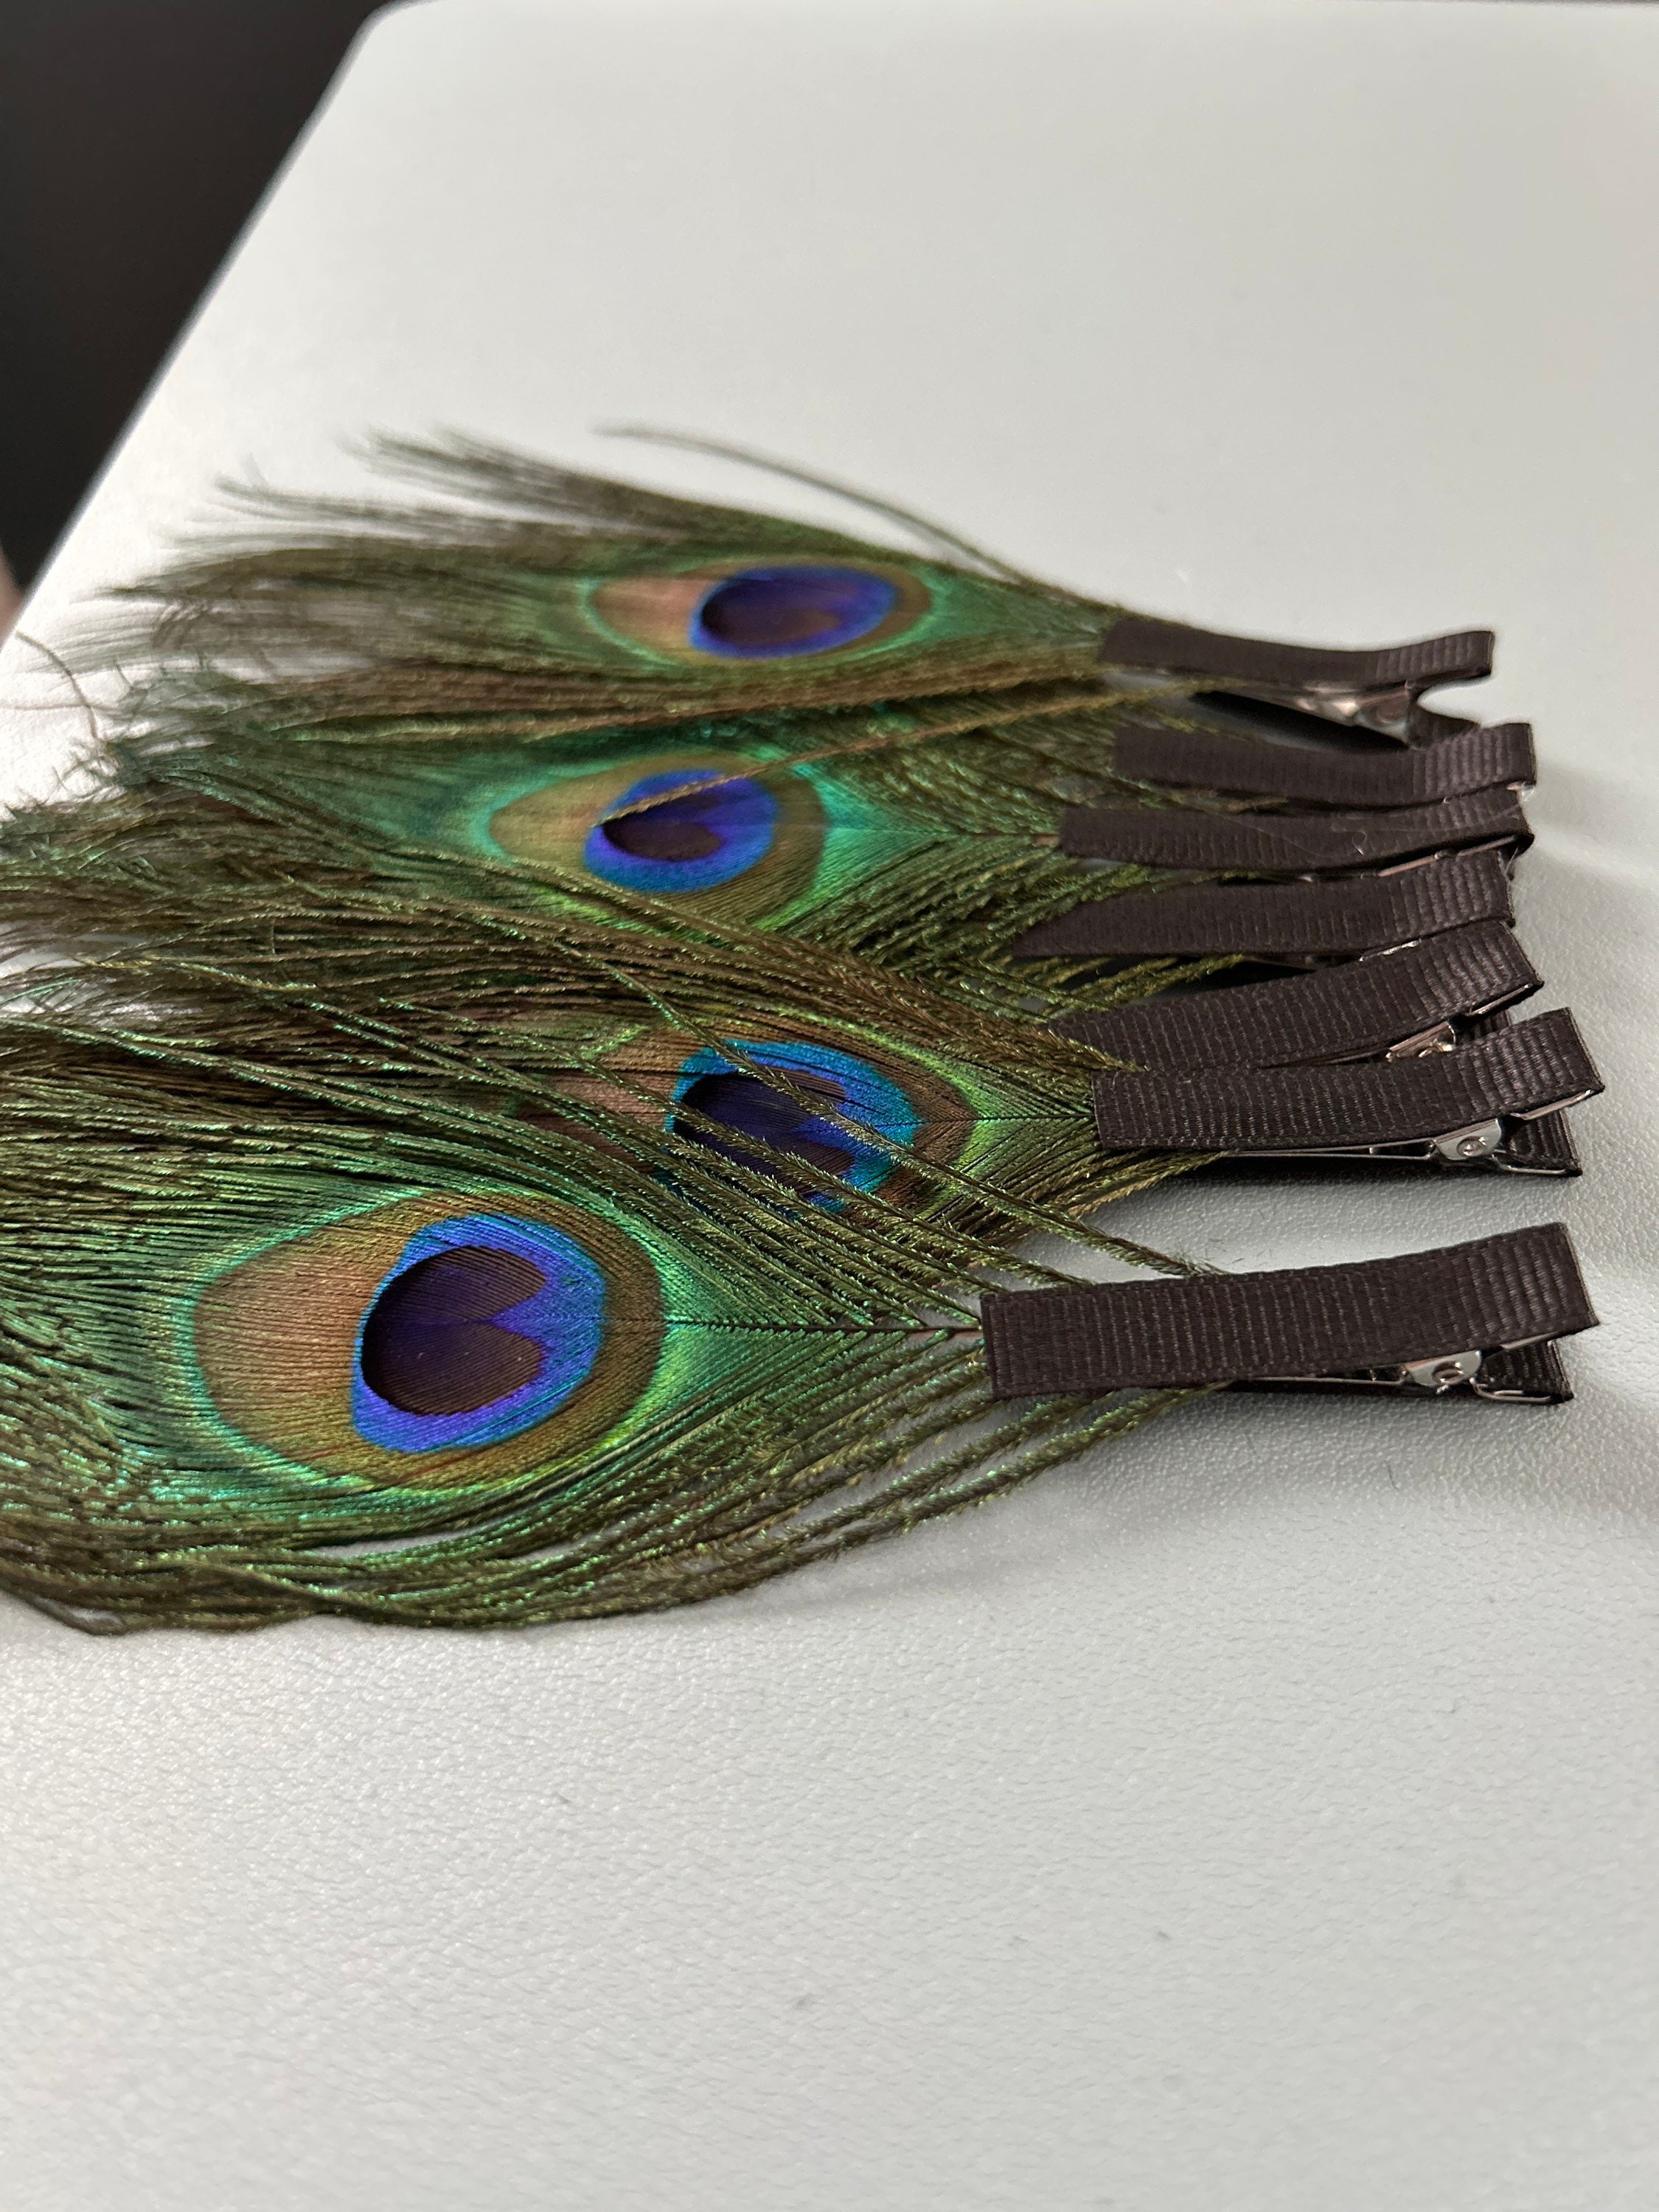 20 Pcs off White 30-35inch Peacock Feather Peacock Feathers for Crafts Hat  Decor 